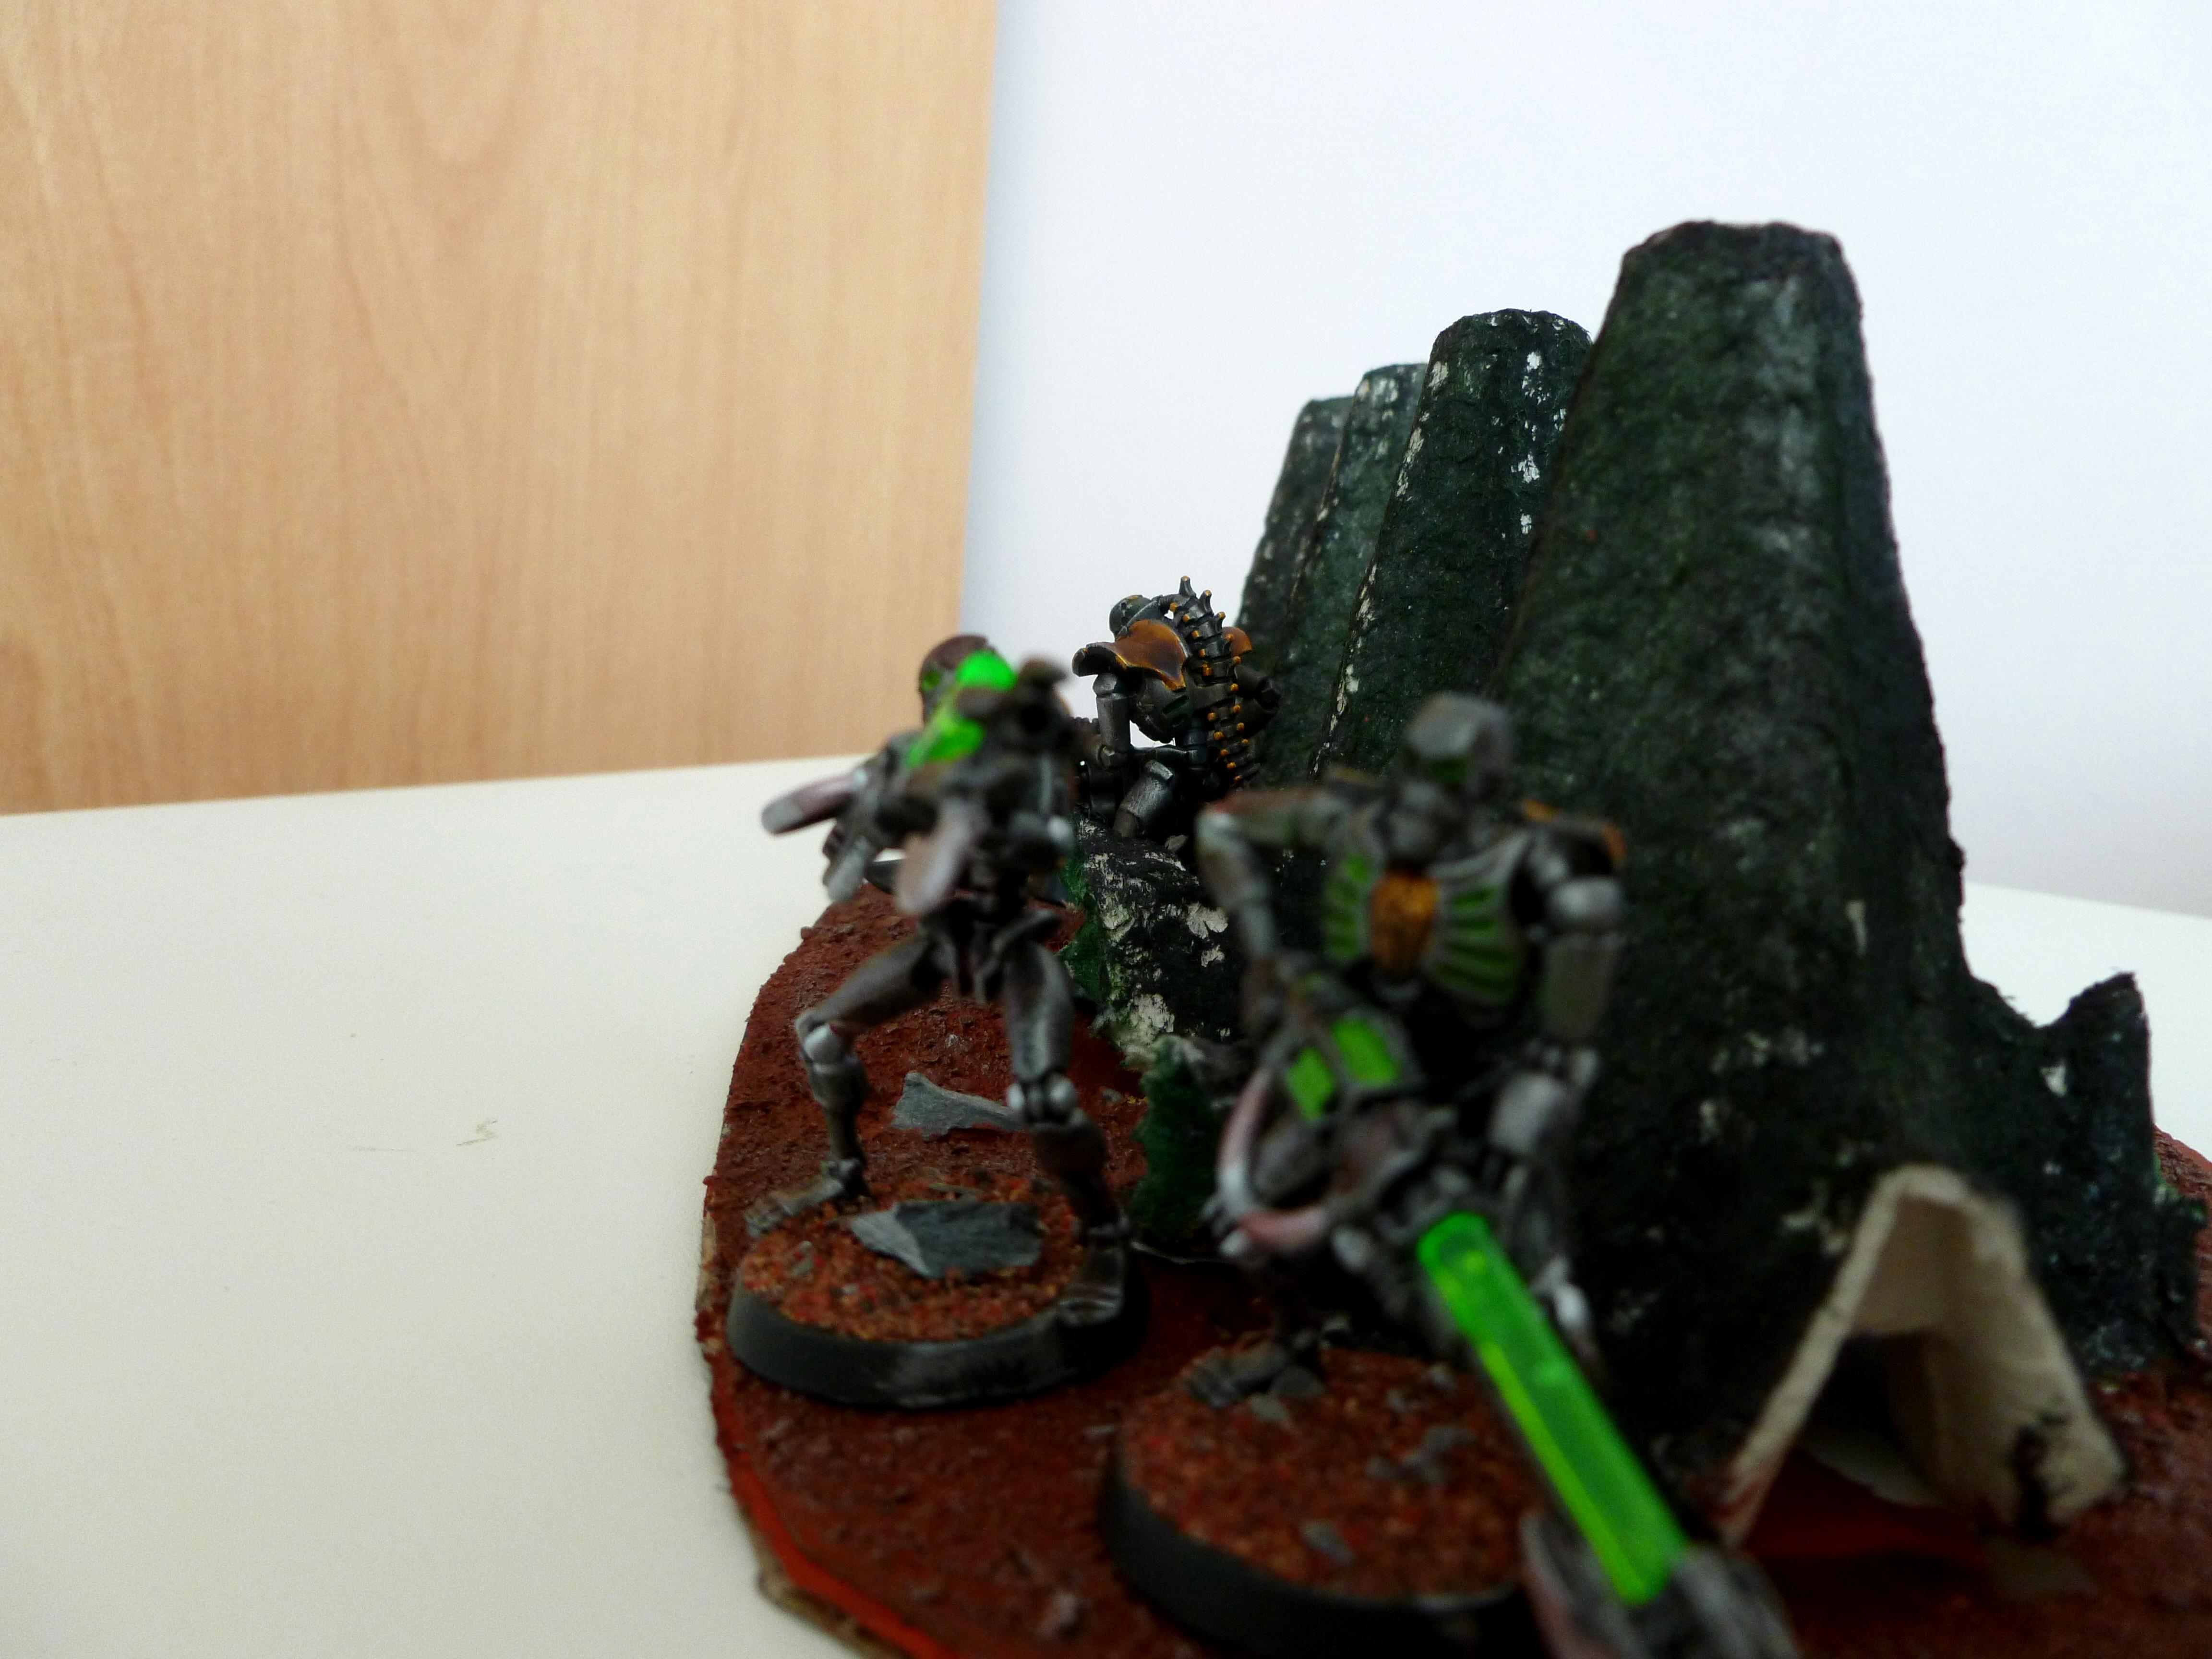 Ancient, Black, Desert, First, Gold, Green, Grey, Living Metal, Necrons, New, Playing, Red, Sand, Stone, Tales, Toy, Toys